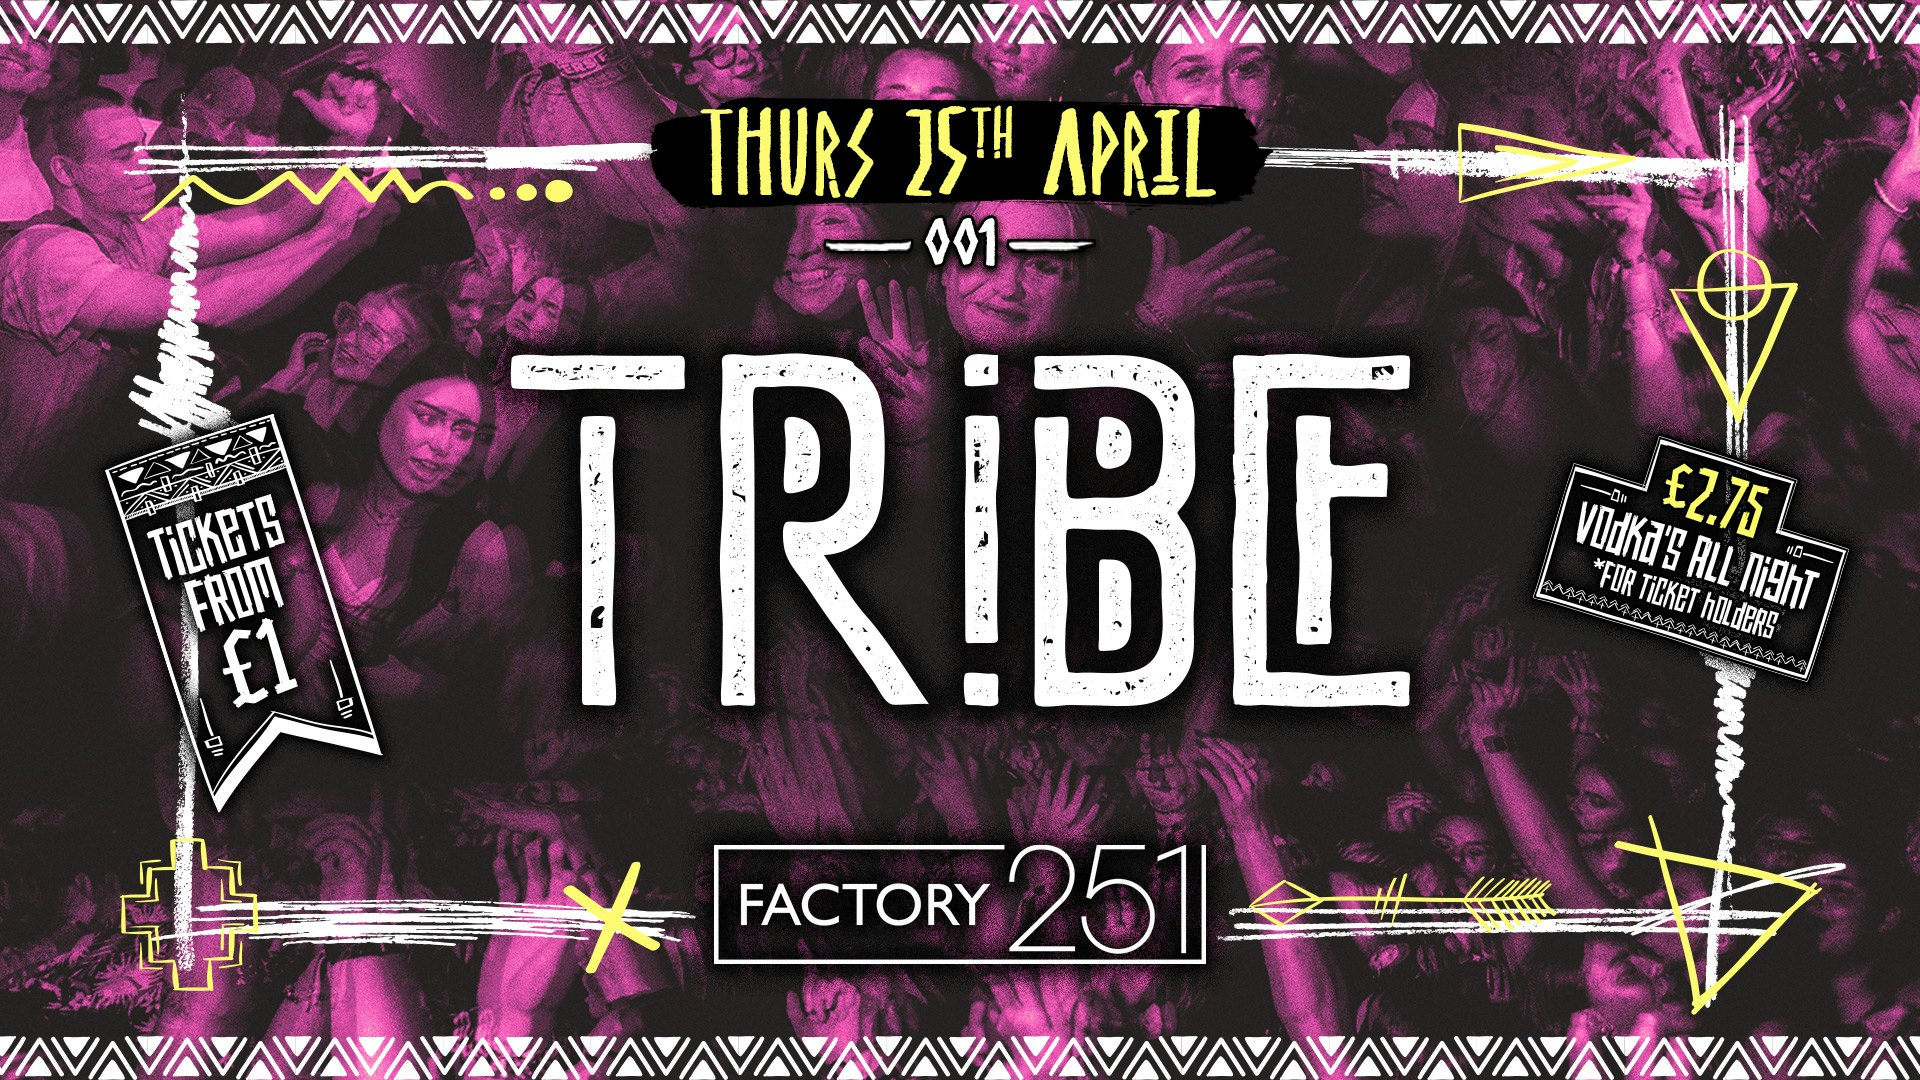 TRIBE 🌴 @ FACTORY | THURSDAY LAUNCH #001 | INTRODUCING ‘THE BOILER ROOM’ 🎶 HUGE CAPACITY VENUE 🔺